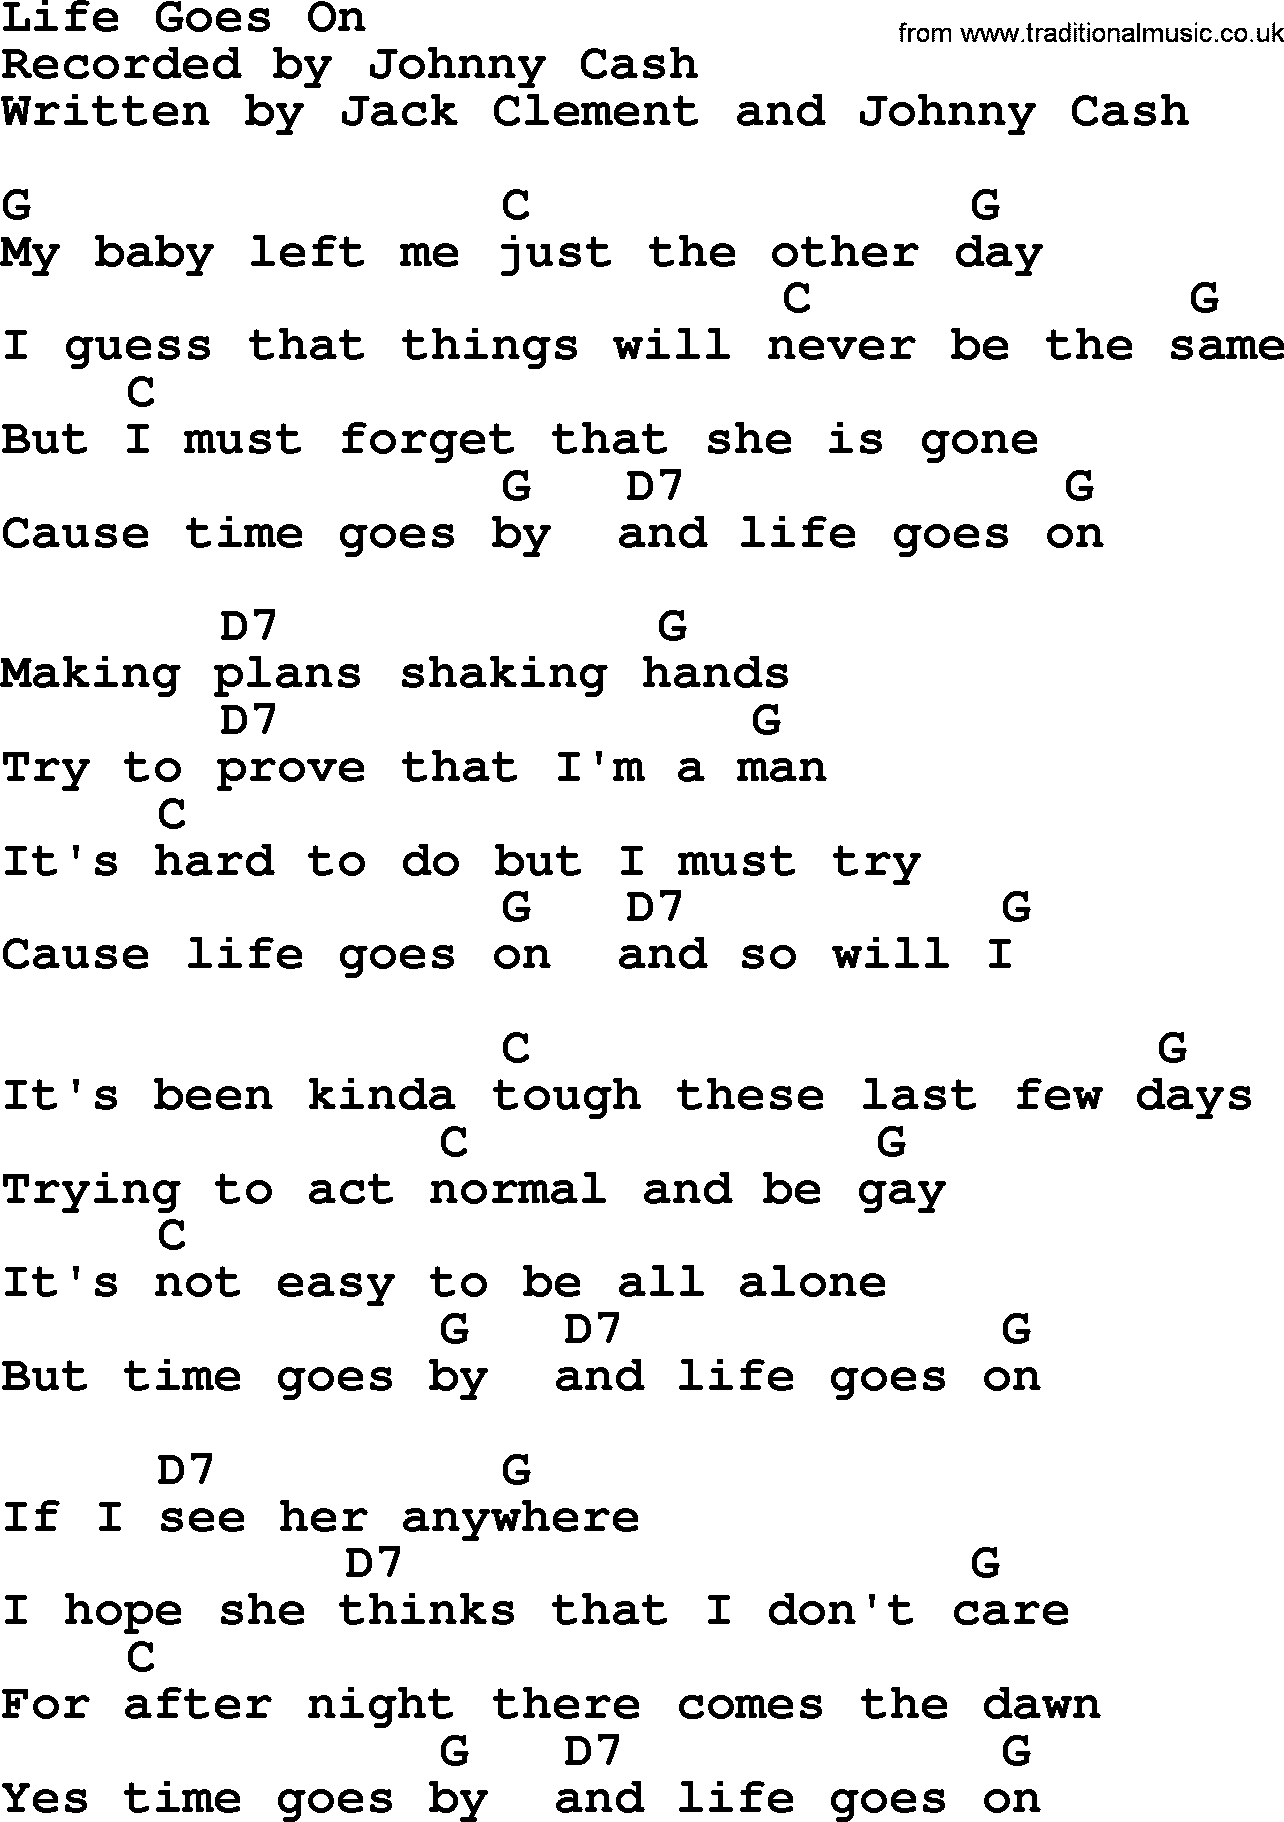 Johnny Cash song Life Goes On, lyrics and chords